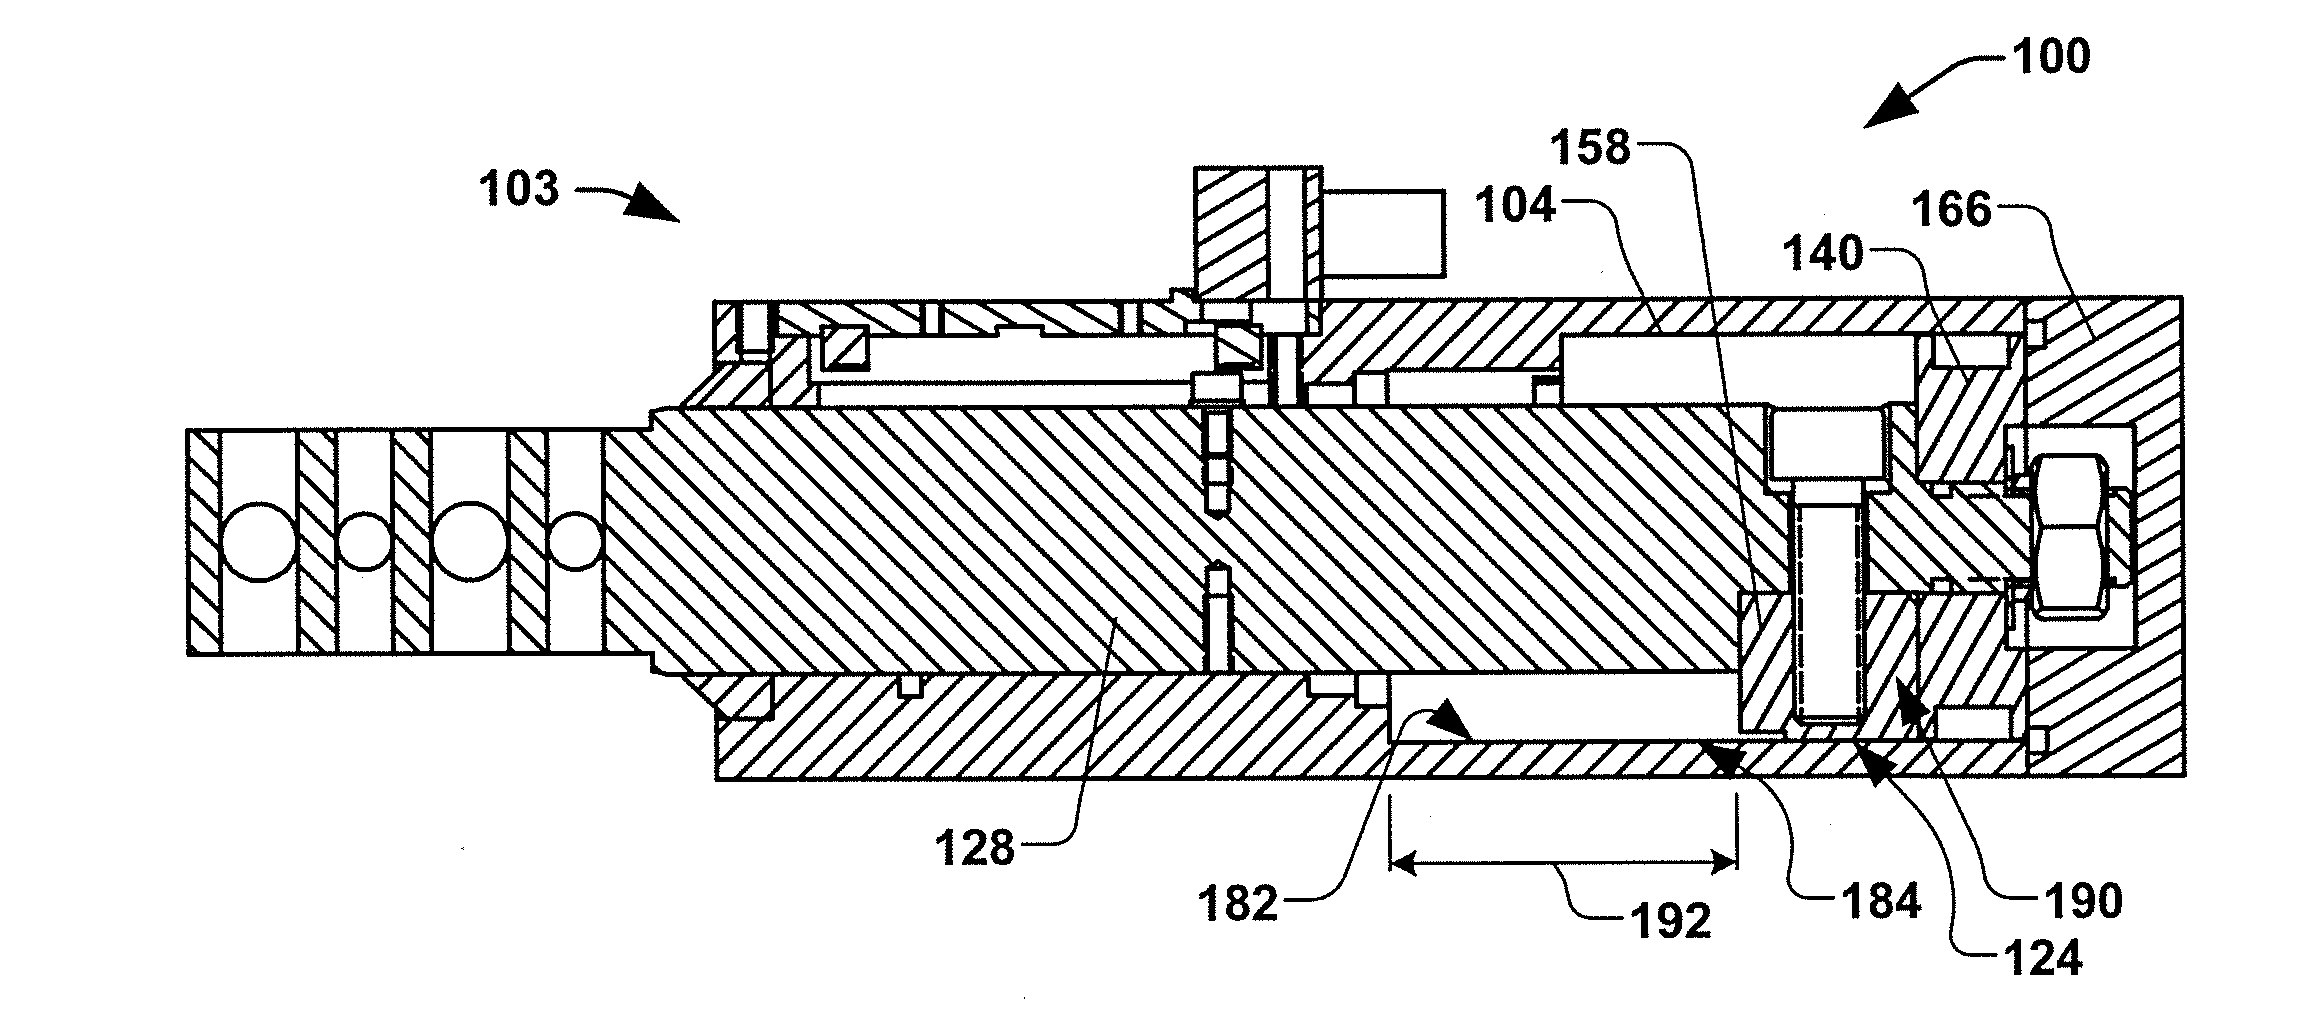 Compact Linear Actuator with Anti-Rotation Device